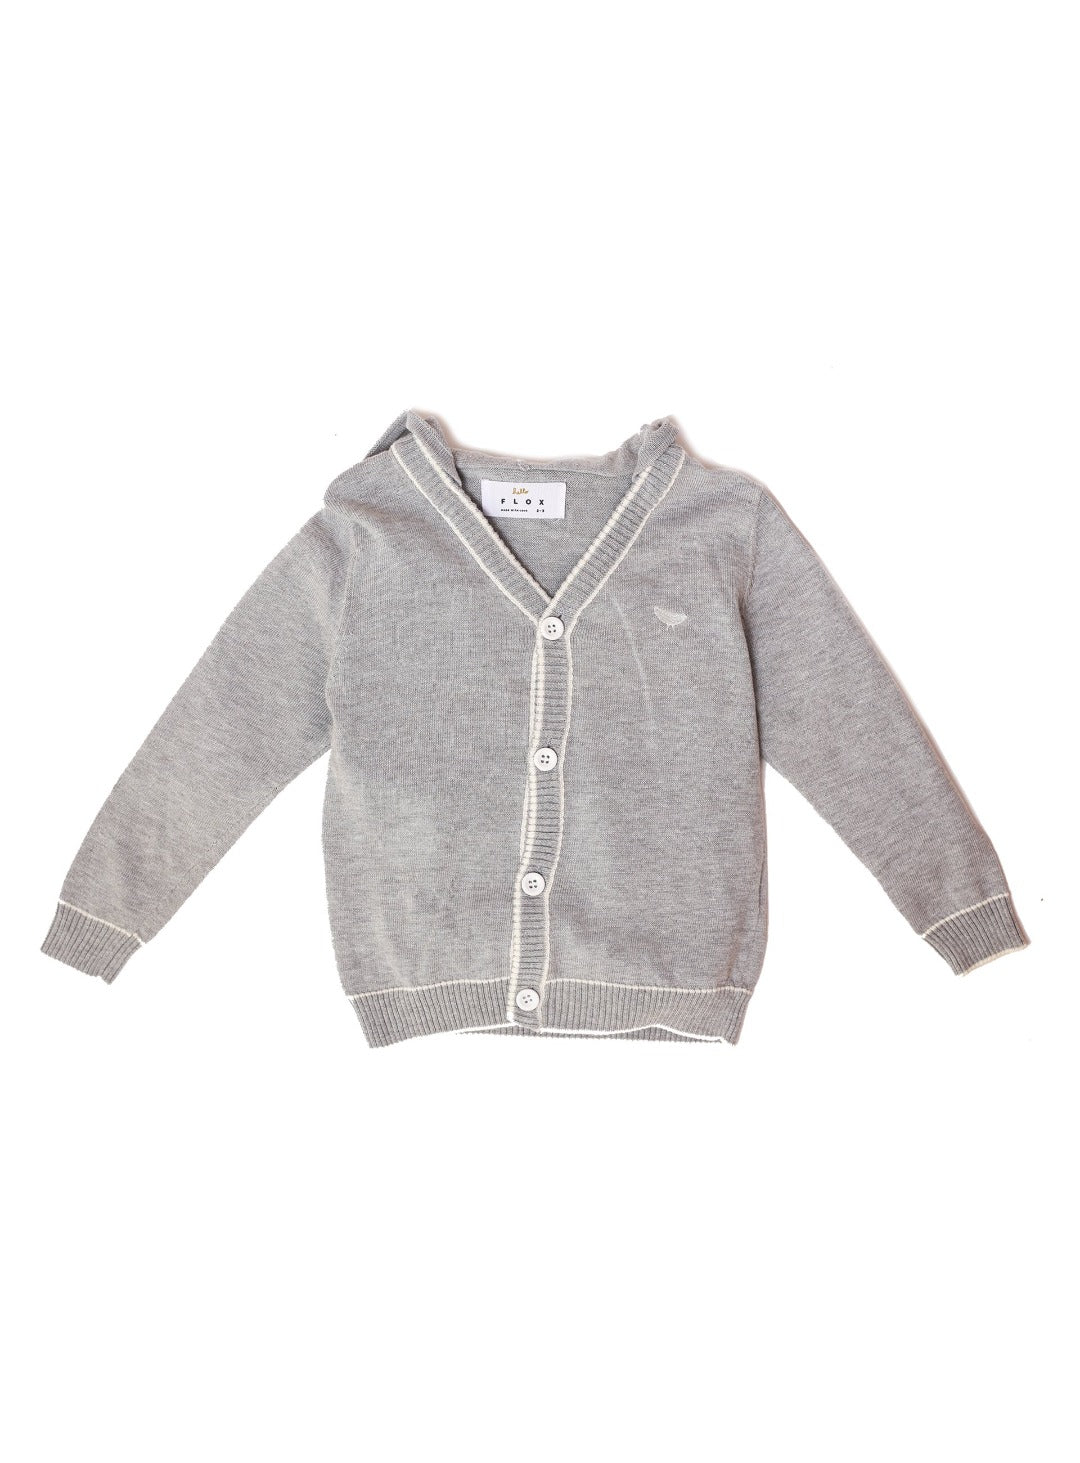 gray hooded cardigan with white buttons